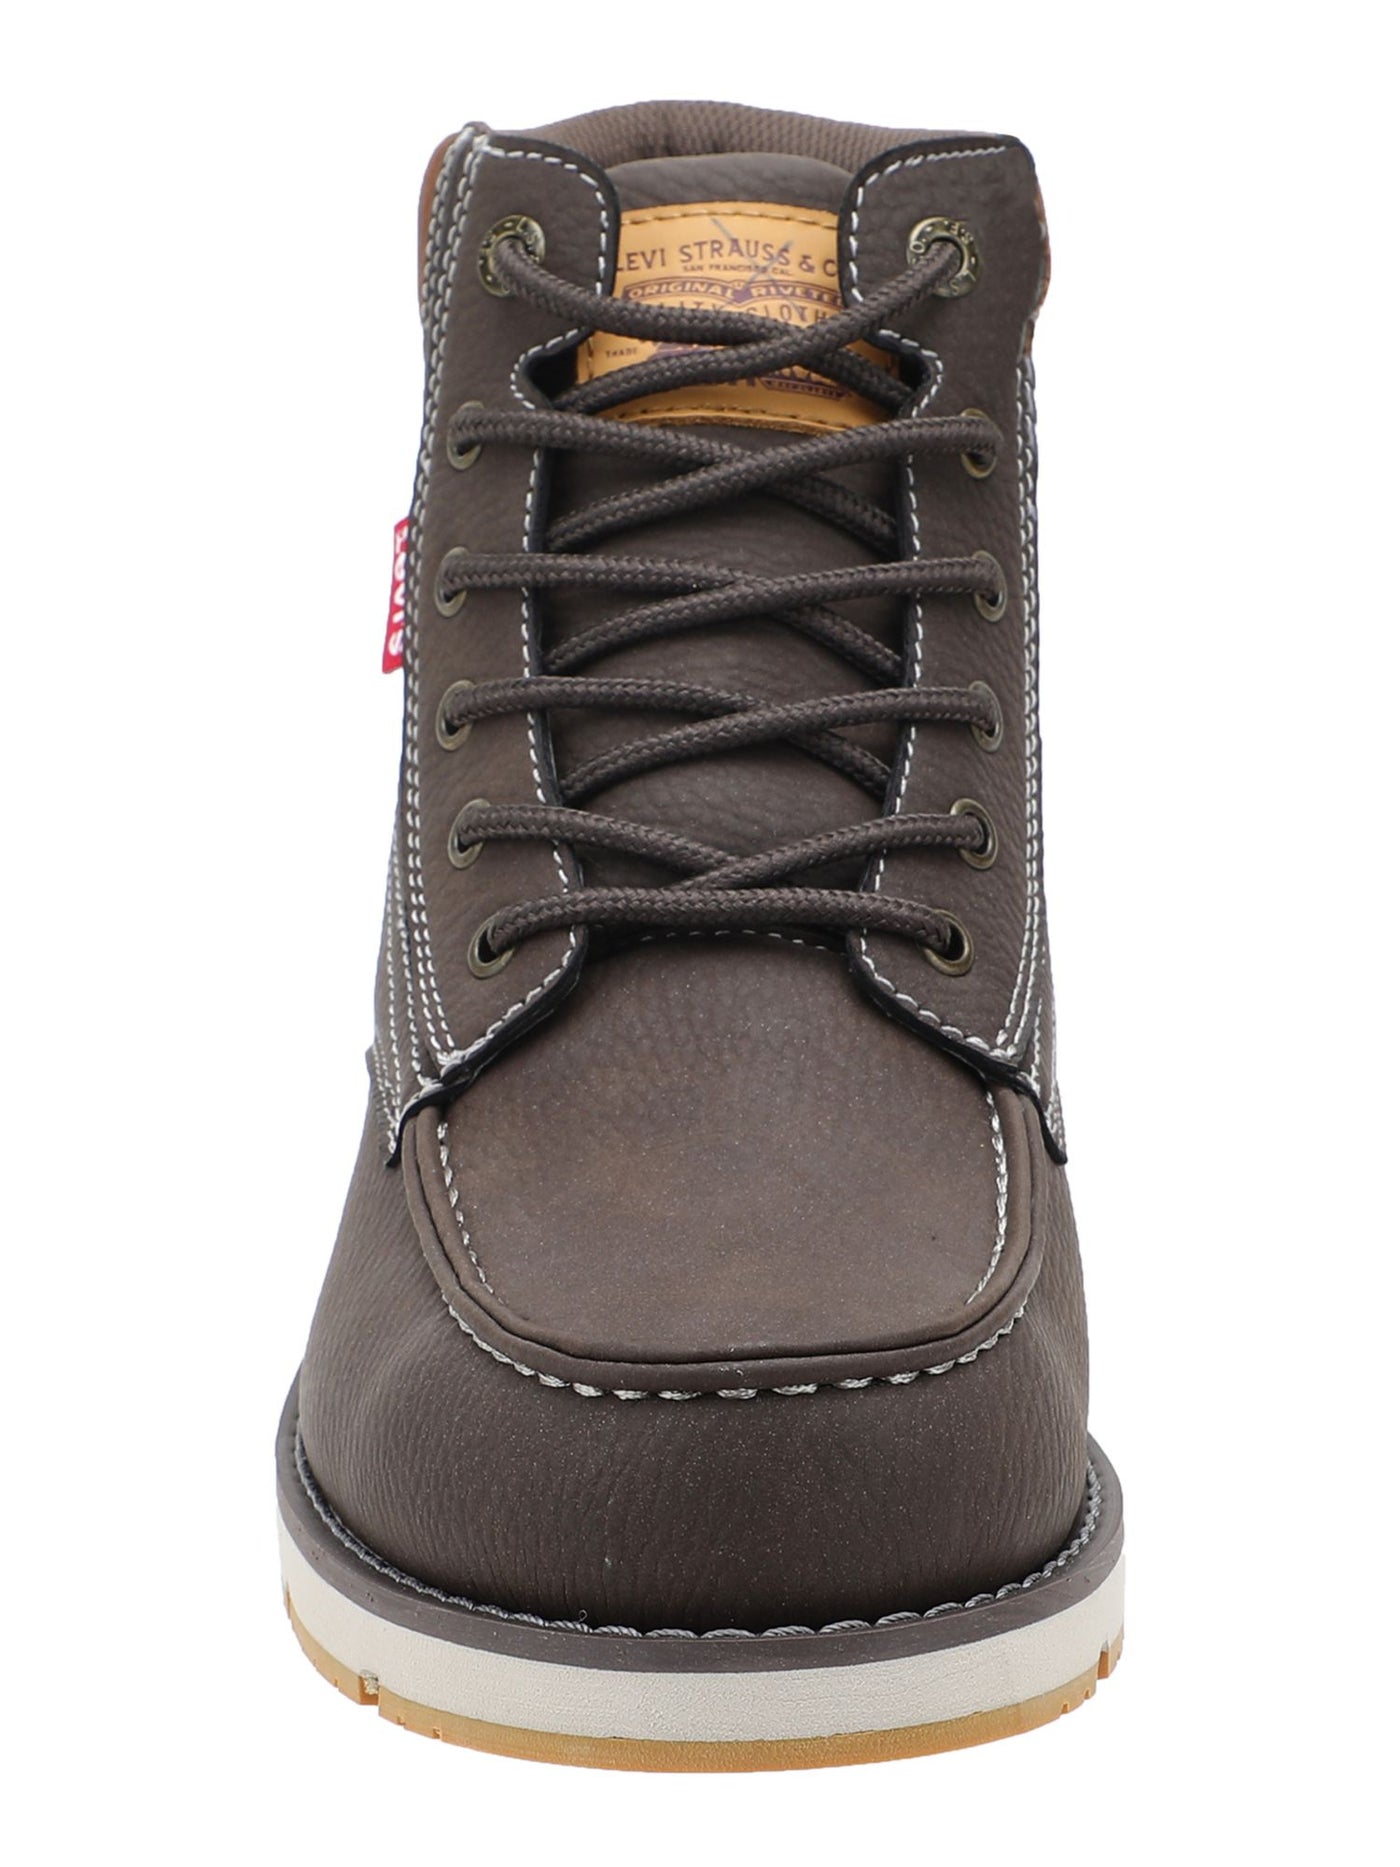 LEVI'S Mens Brown Dean Round Toe Lace-Up Boots Shoes 9.5